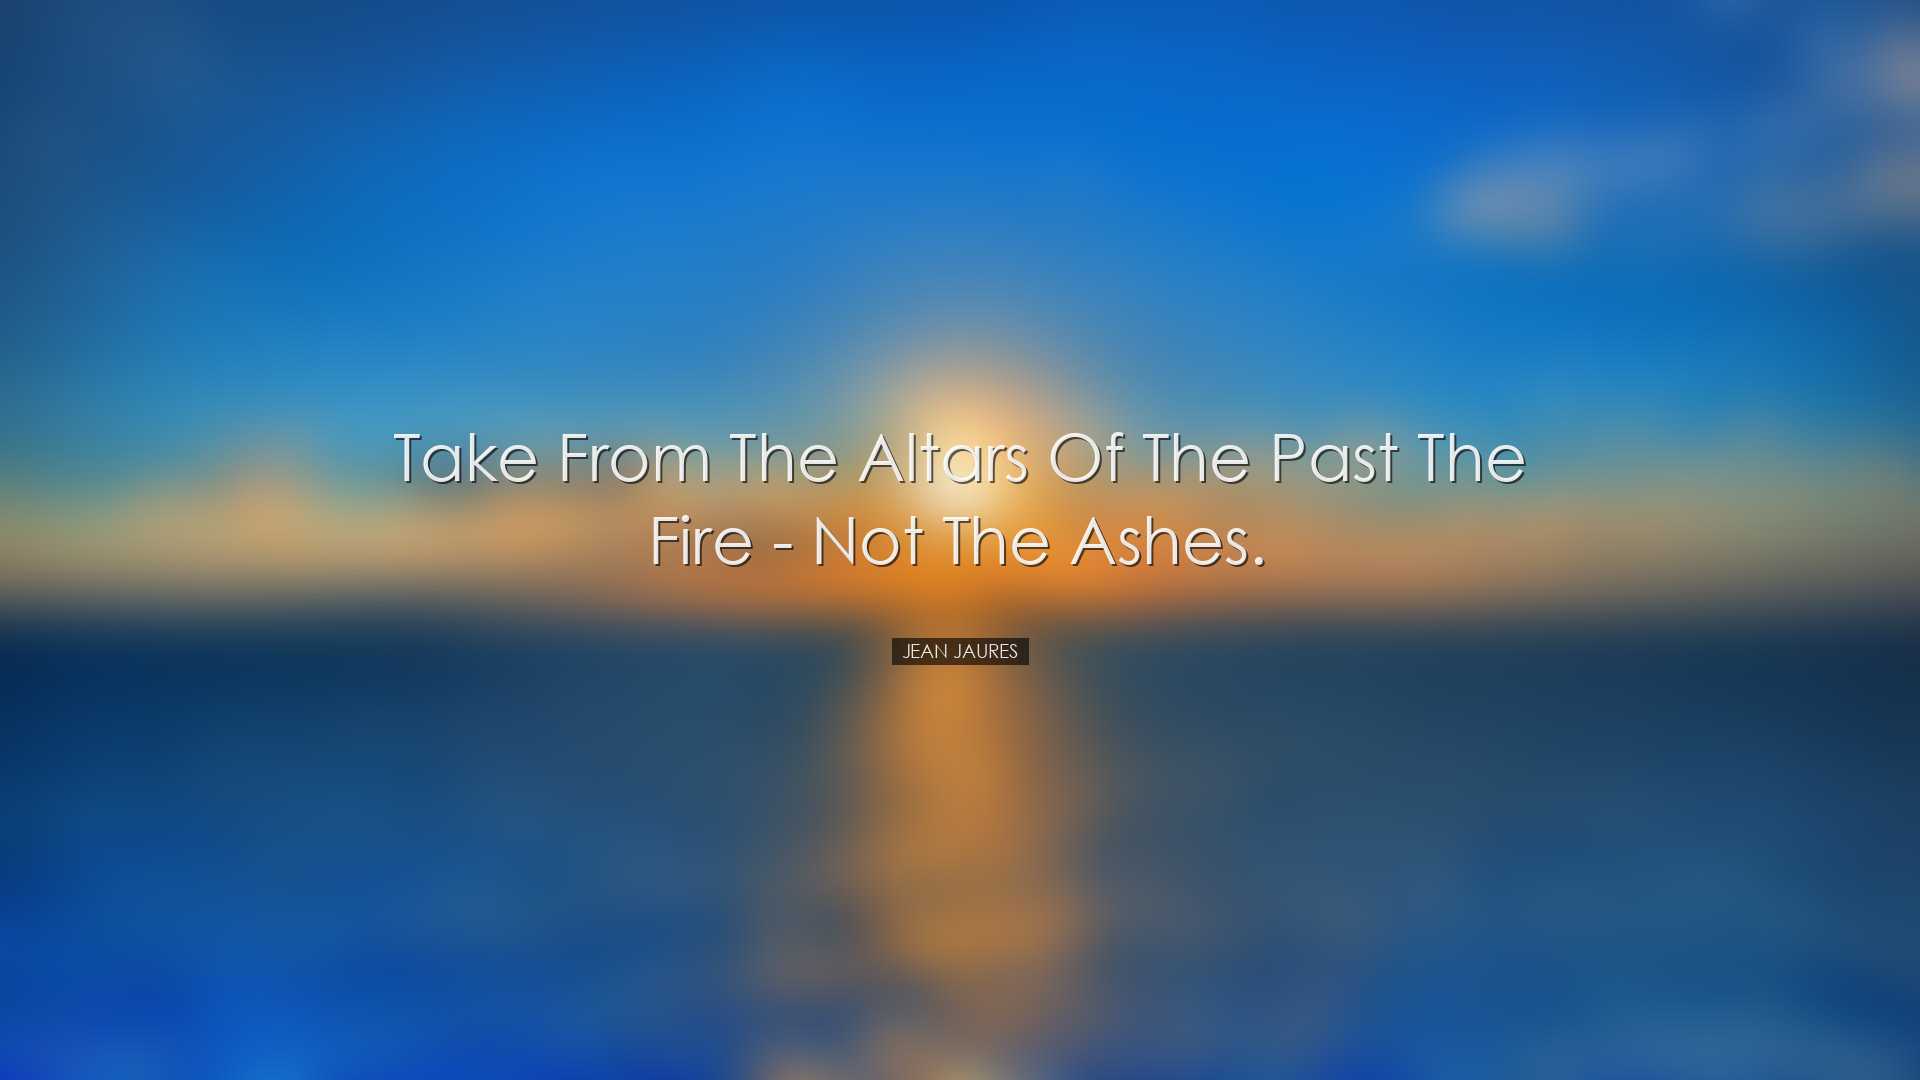 Take from the altars of the past the fire - not the ashes. - Jean